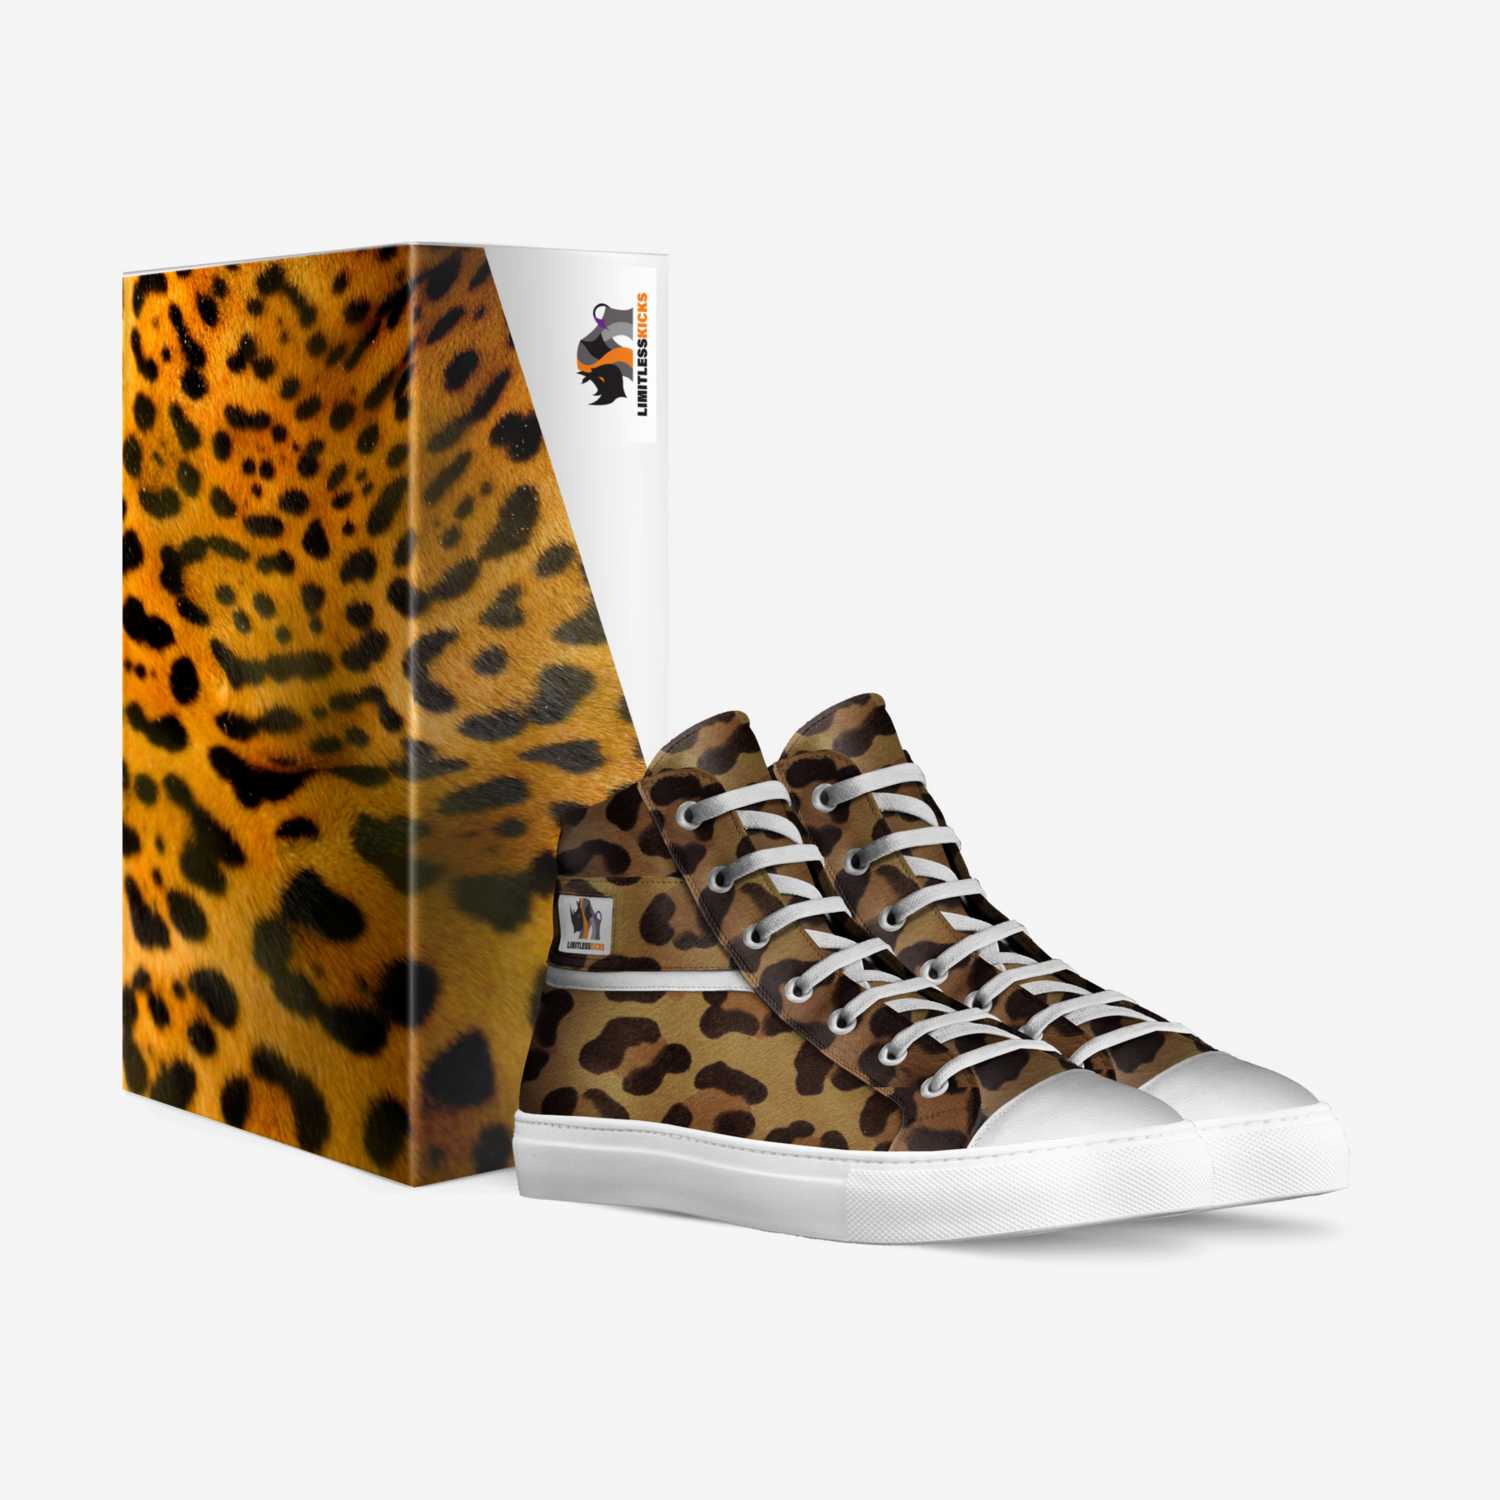 Limitless Animal custom made in Italy shoes by Limitless Kicks | Box view